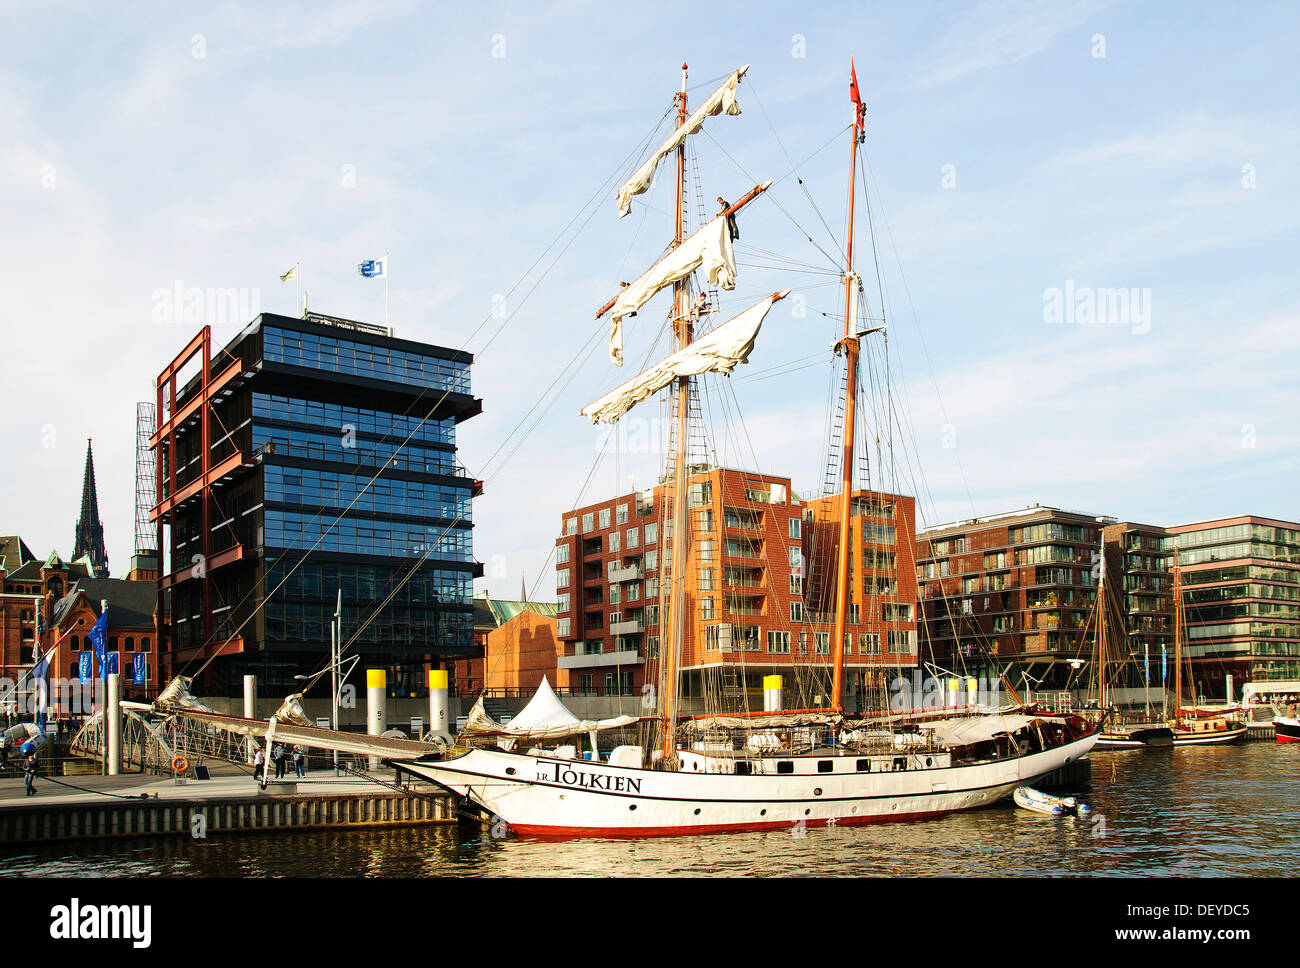 SS Tolkien, historic sailing ship moored in the Traditionsschiffhafen, traditional ship harbour, Sandtorhafen, HafenCity Stock Photo